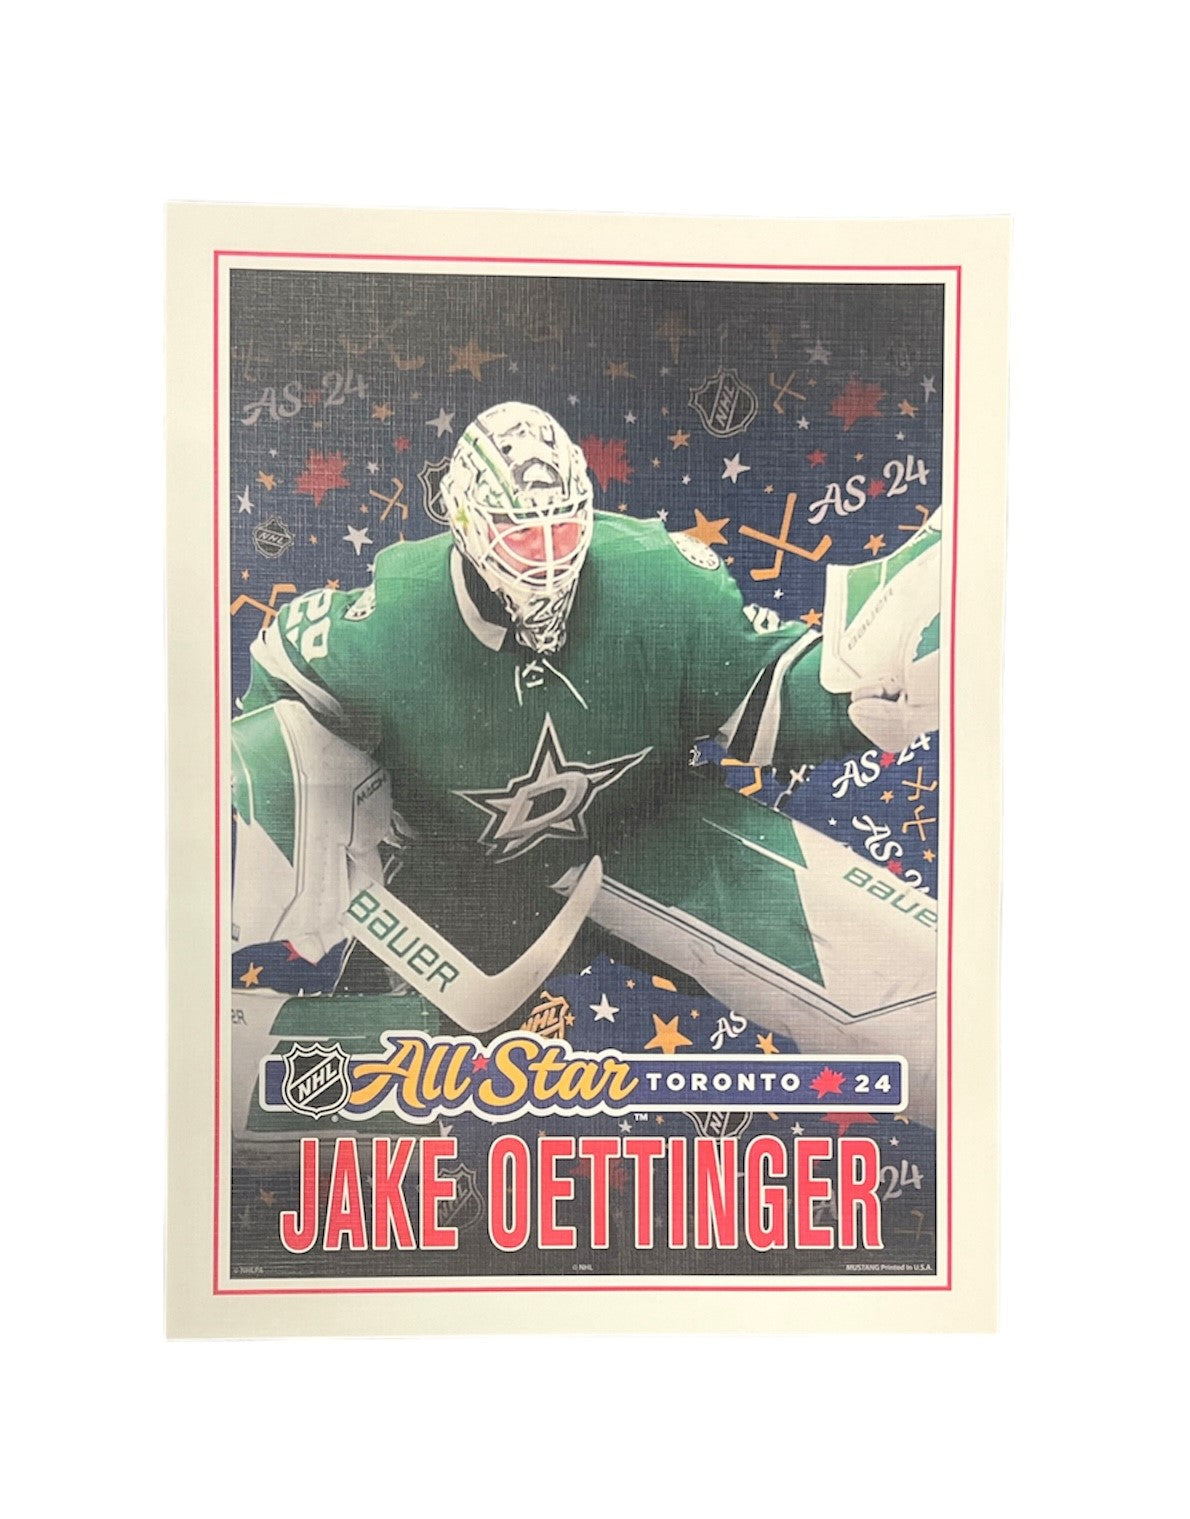 DALLAS STARS MUSTANG JAKE OETTINGER ALL-STAR 12x16 PRINT - FRONT VIEW